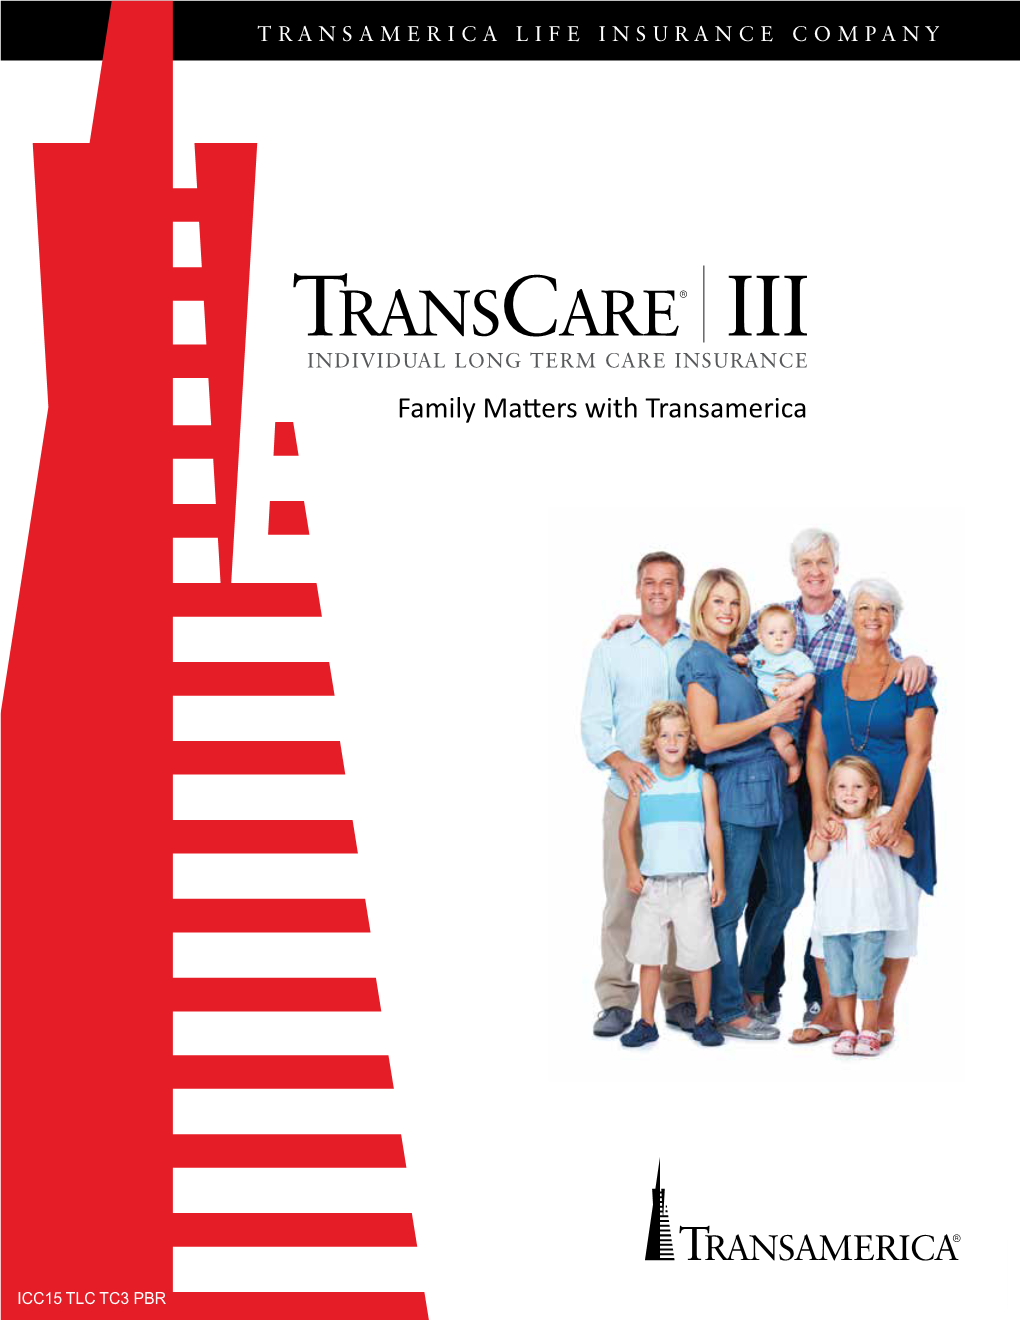 Family Matters with Transamerica